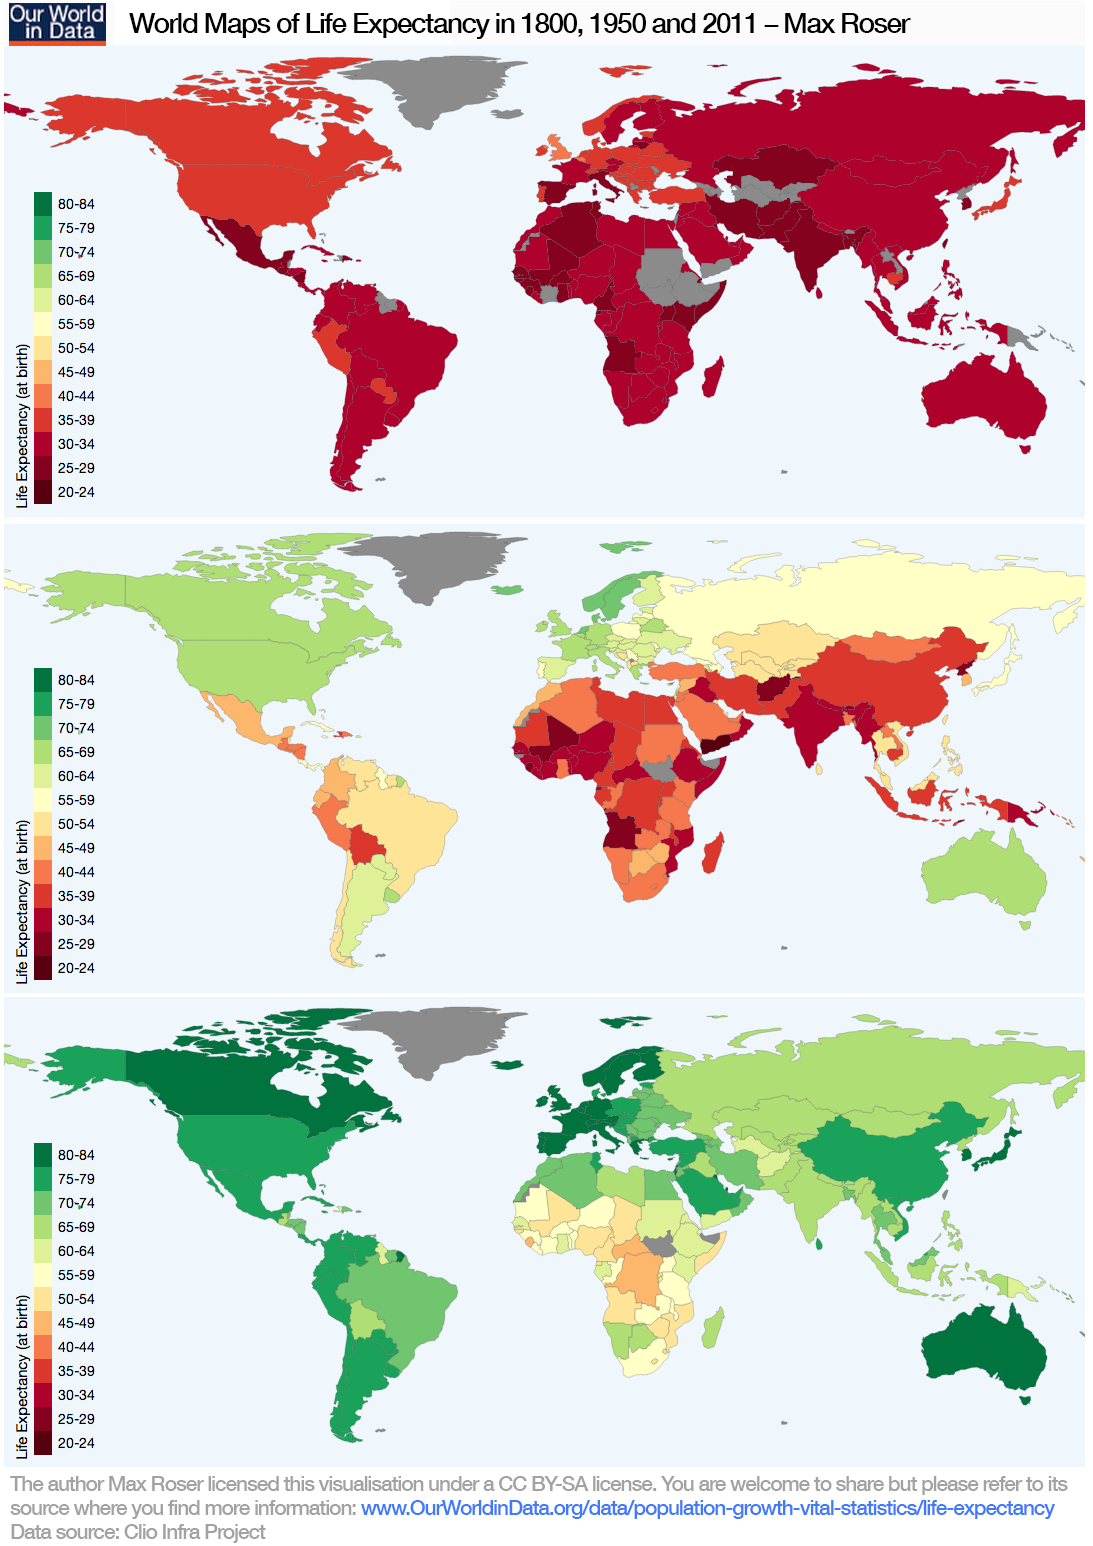 World Maps of Life Expectancy in 1800, 1950, and... - Maps on the Web